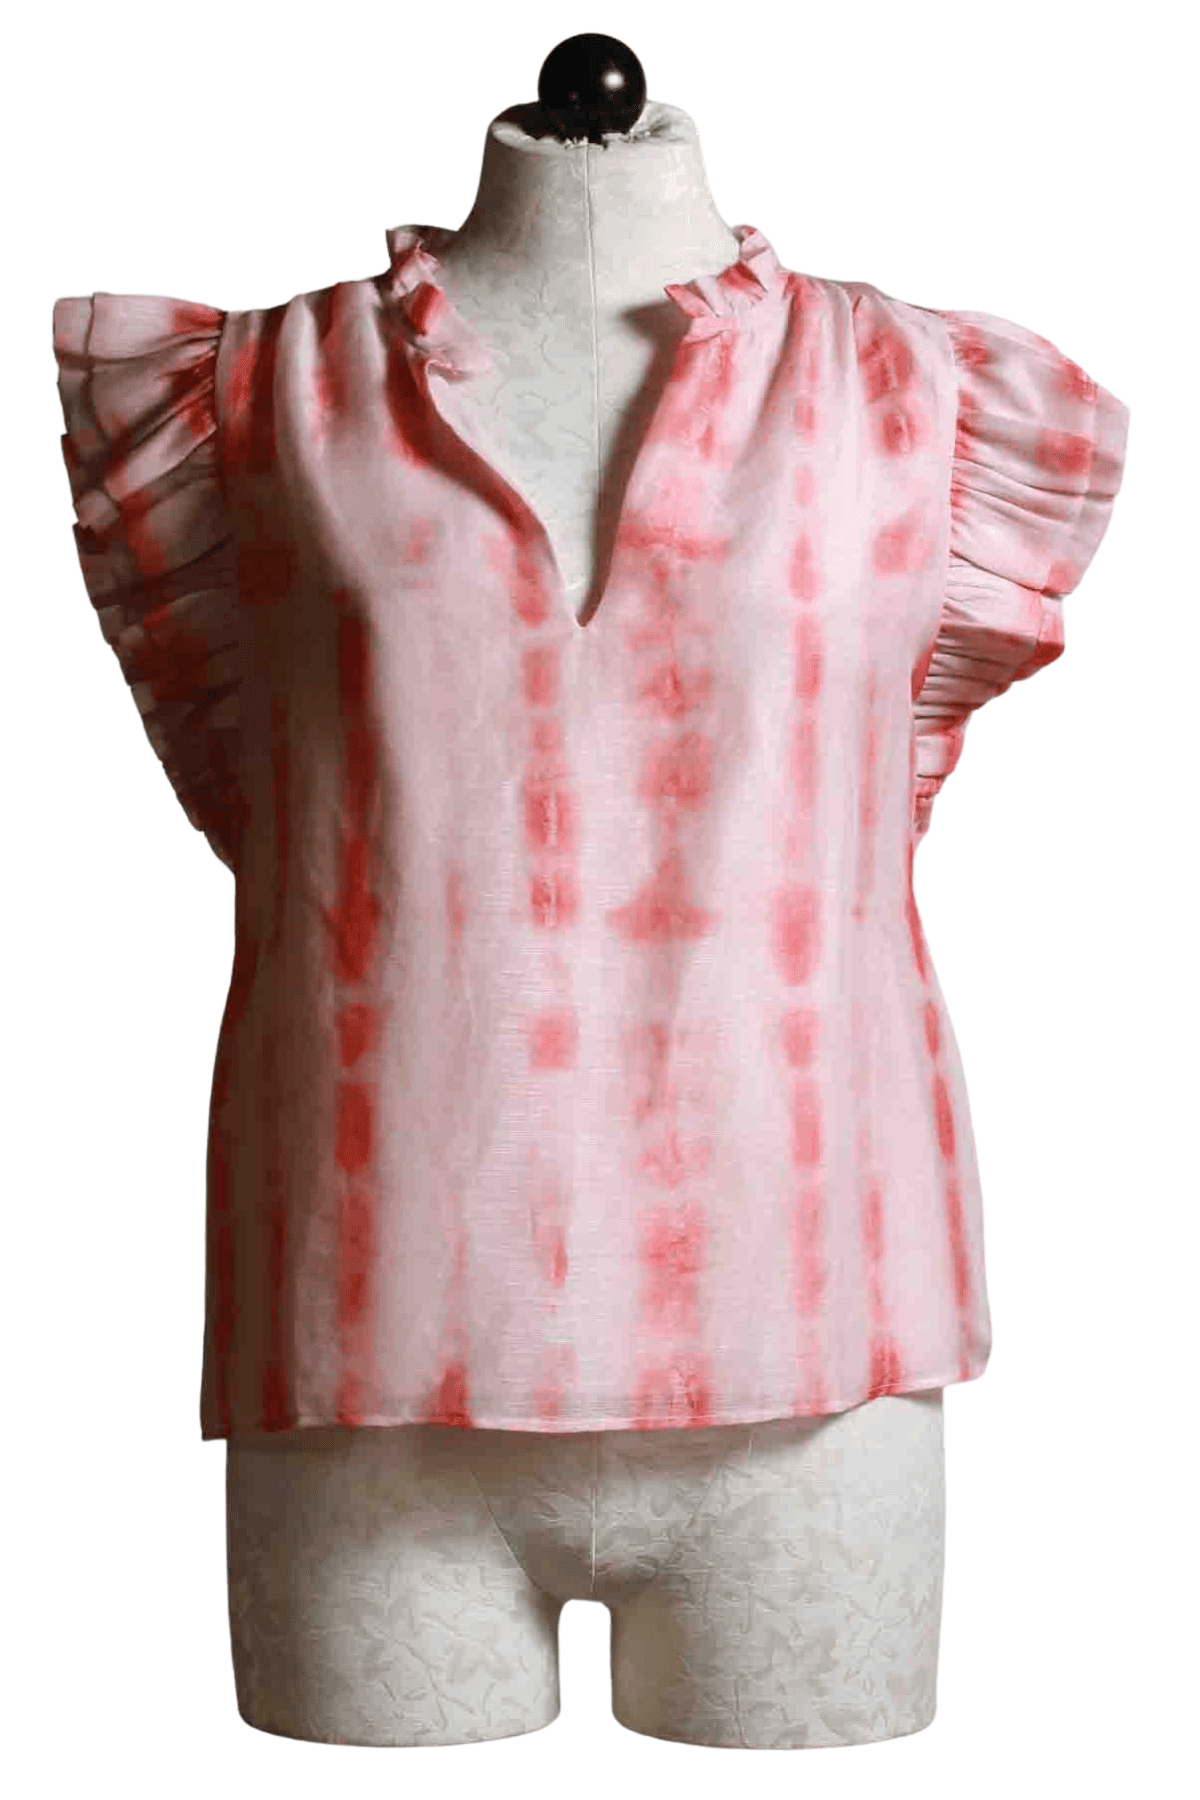 Ruffled Shoulder Merrit Top by Marie Oliver in a cranberry tie dye print and split neckline 